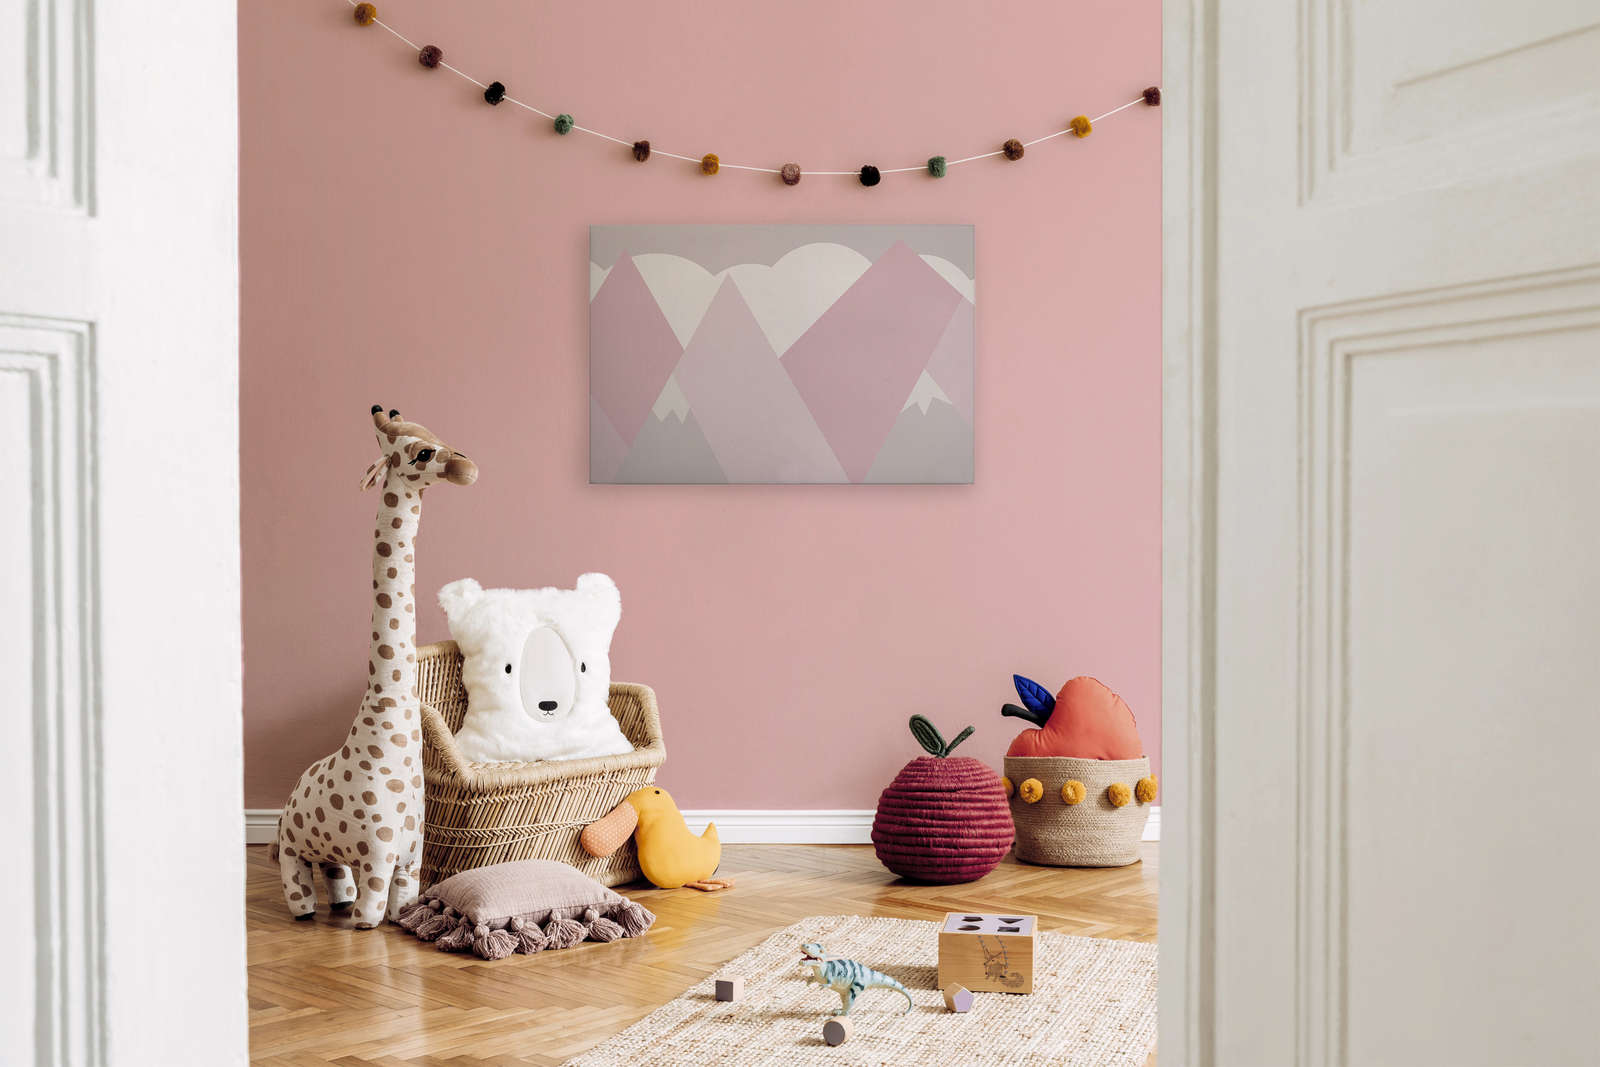             Canvas painting Nursery Mountains with clouds | pink, white, grey - 0,90 m x 0,60 m
        